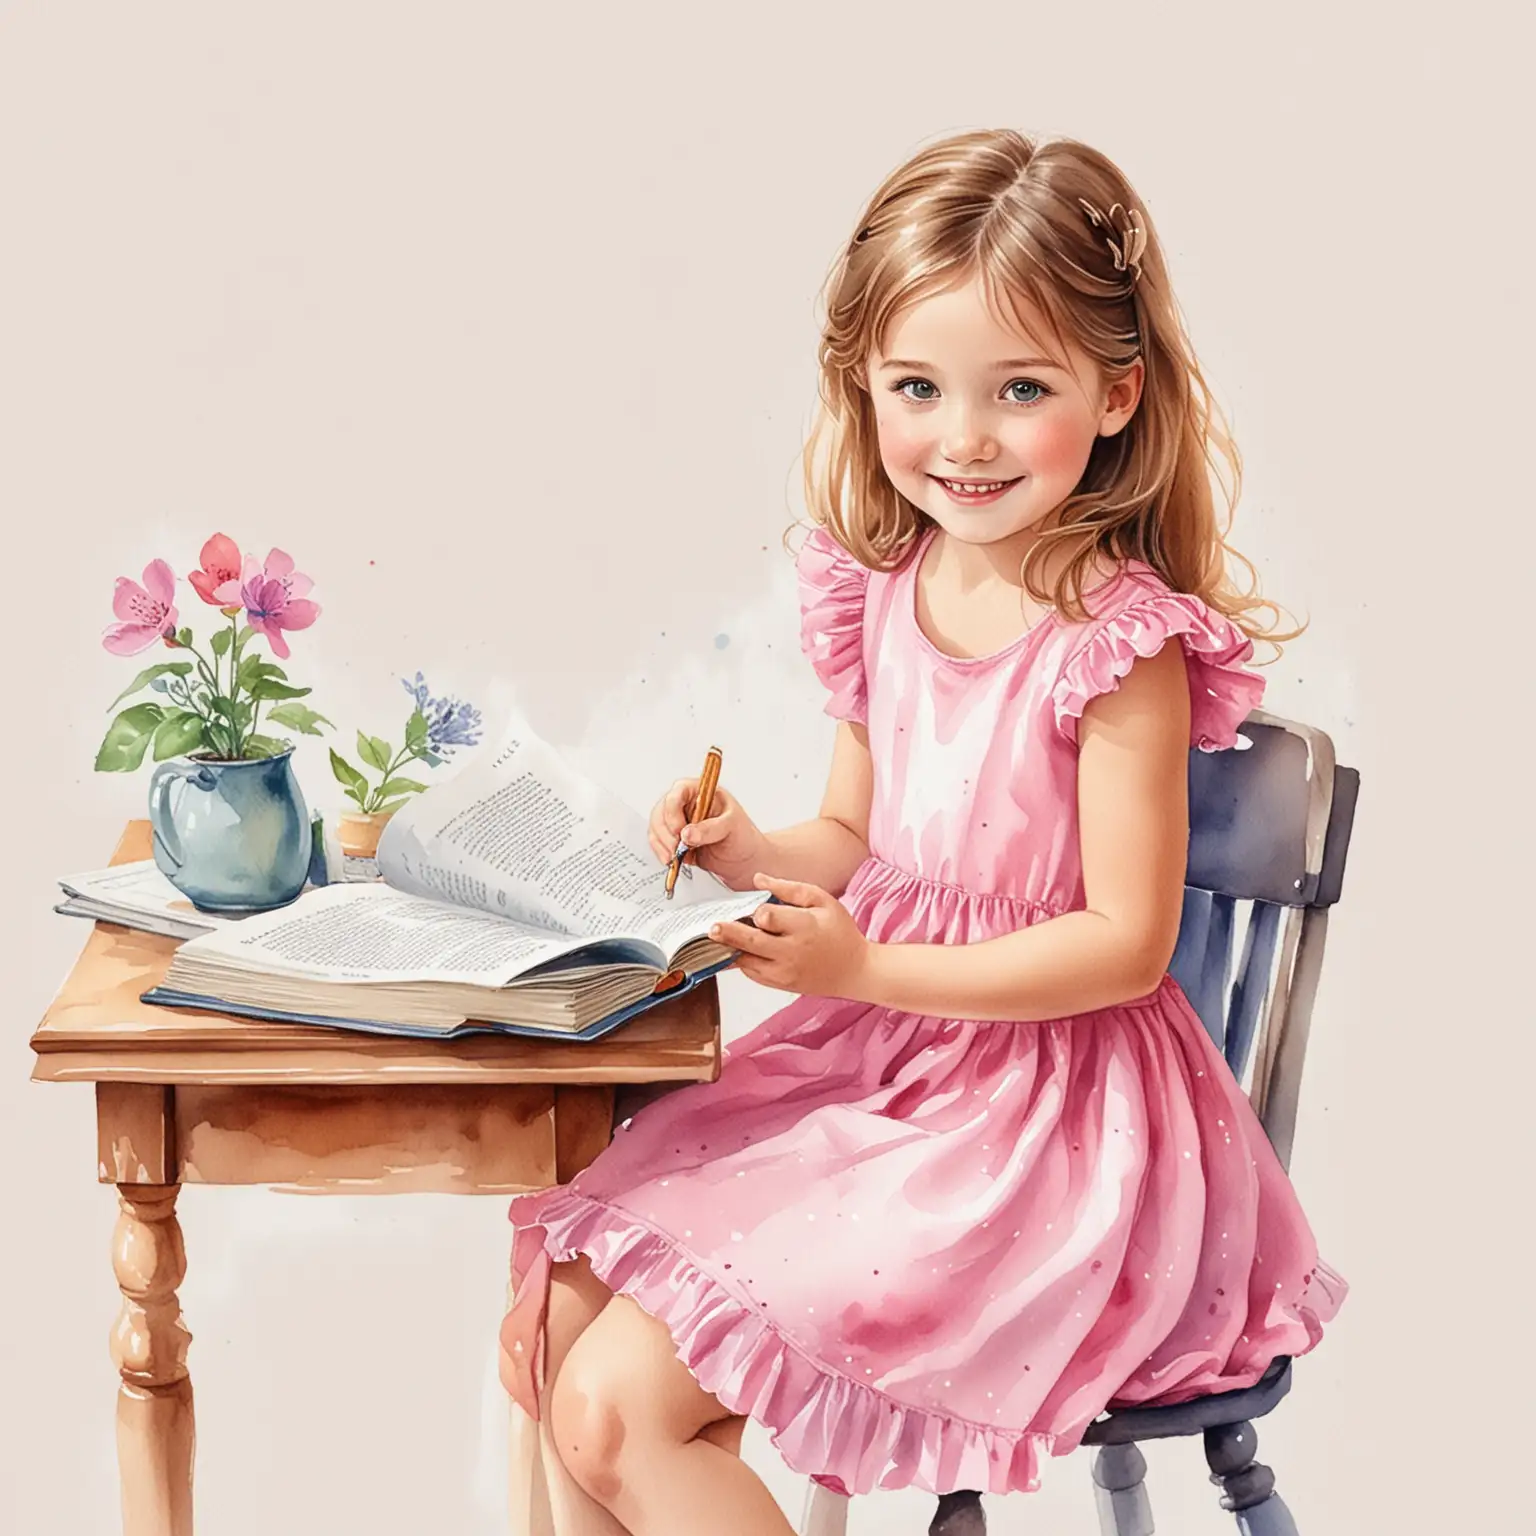 Cheerful 5YearOld Girl Reading at a Magical School Desk Watercolor Illustration